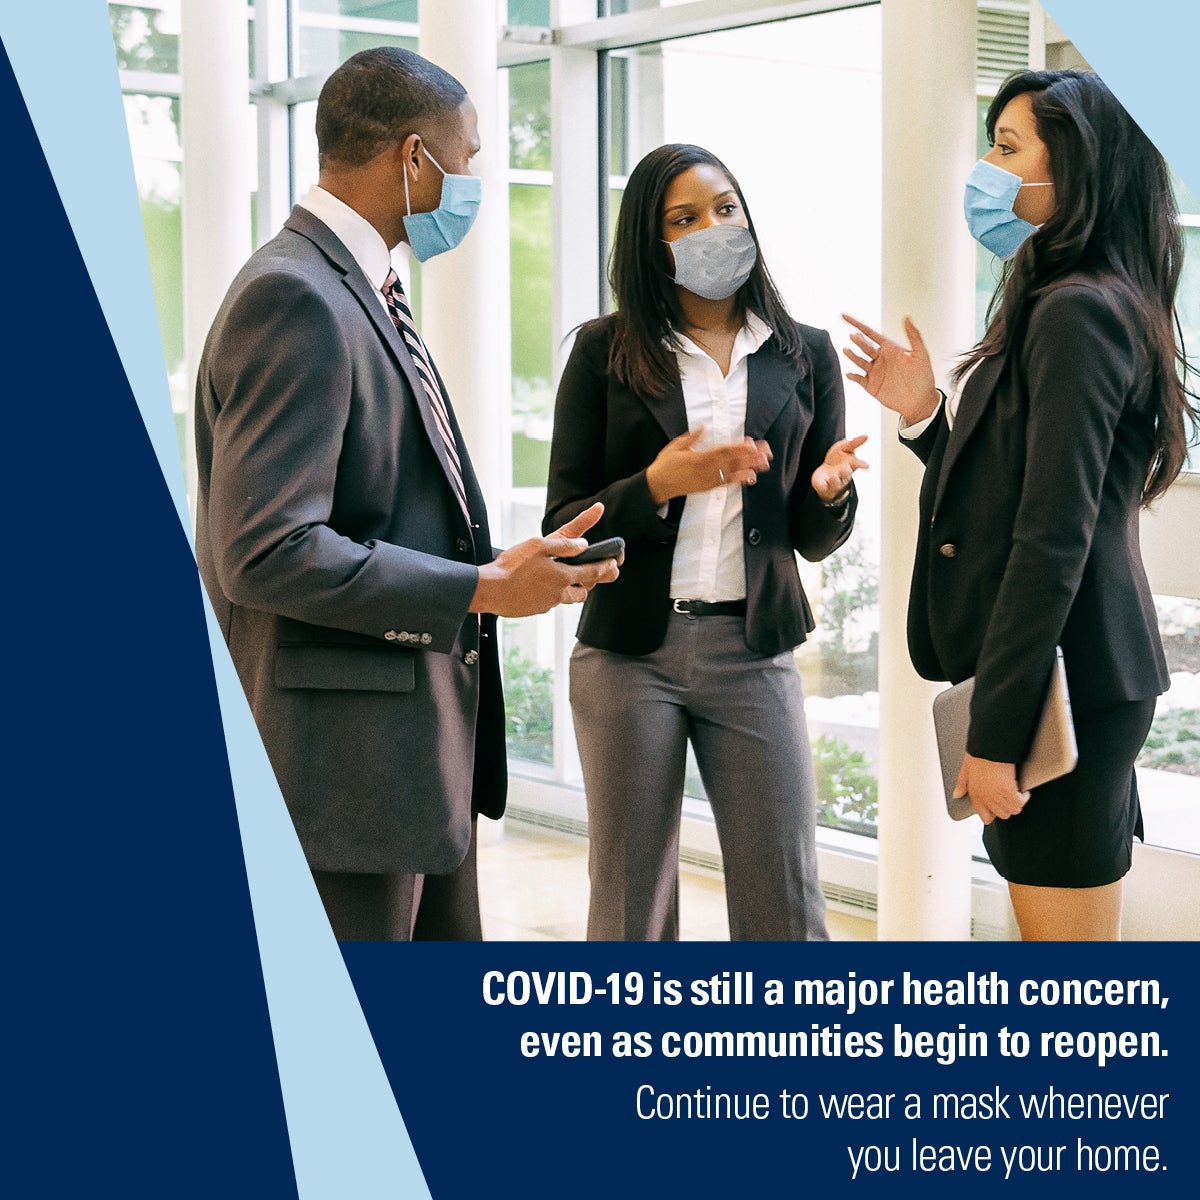 Masked office workers, two female and one male, stand together talking. Caption: COVID-19 is still a major health convern, even as communitites begin to reopen. Continue to wear a mask whenever you leaver your home.